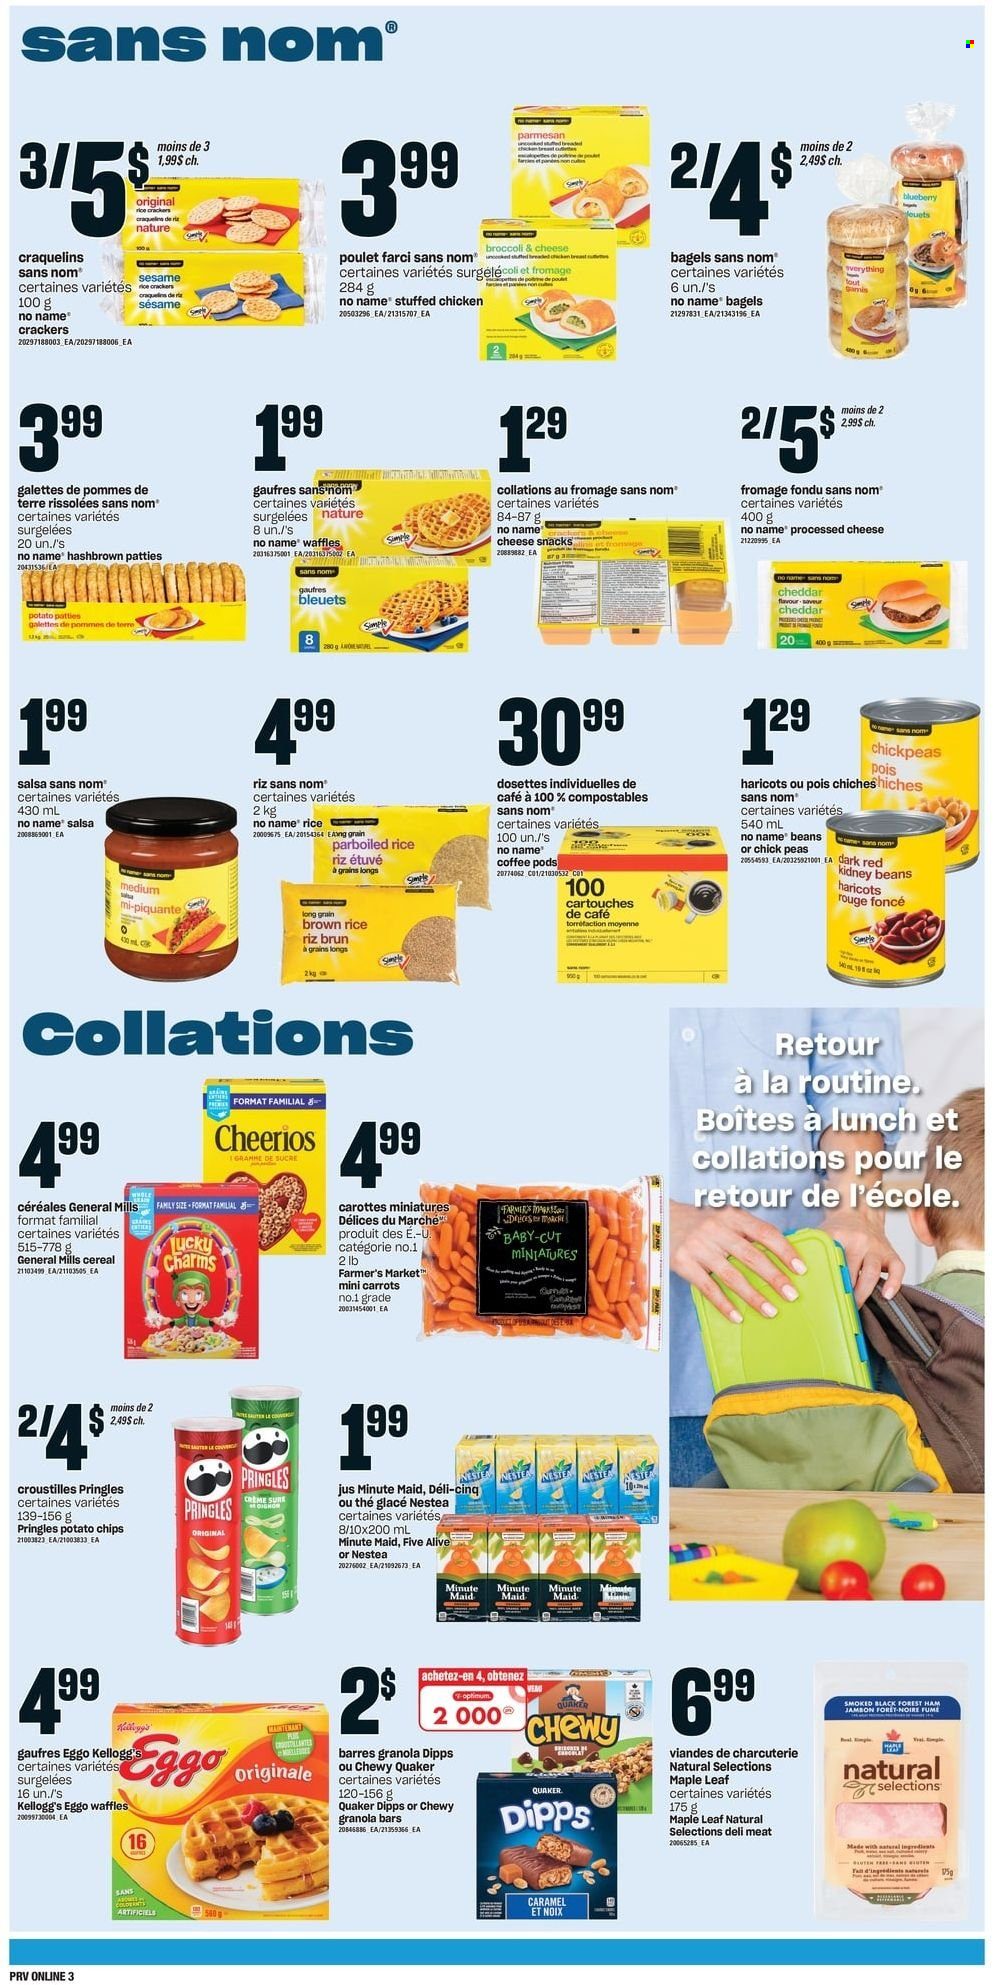 thumbnail - Provigo Flyer - January 06, 2022 - January 12, 2022 - Sales products - bagels, waffles, peas, No Name, Quaker, stuffed chicken, ham, parmesan, snack, crackers, Kellogg's, potato chips, Pringles, rice crackers, kidney beans, cereals, Cheerios, granola bar, brown rice, chickpeas, parboiled rice, caramel, salsa, fruit punch, coffee pods, chips. Page 7.